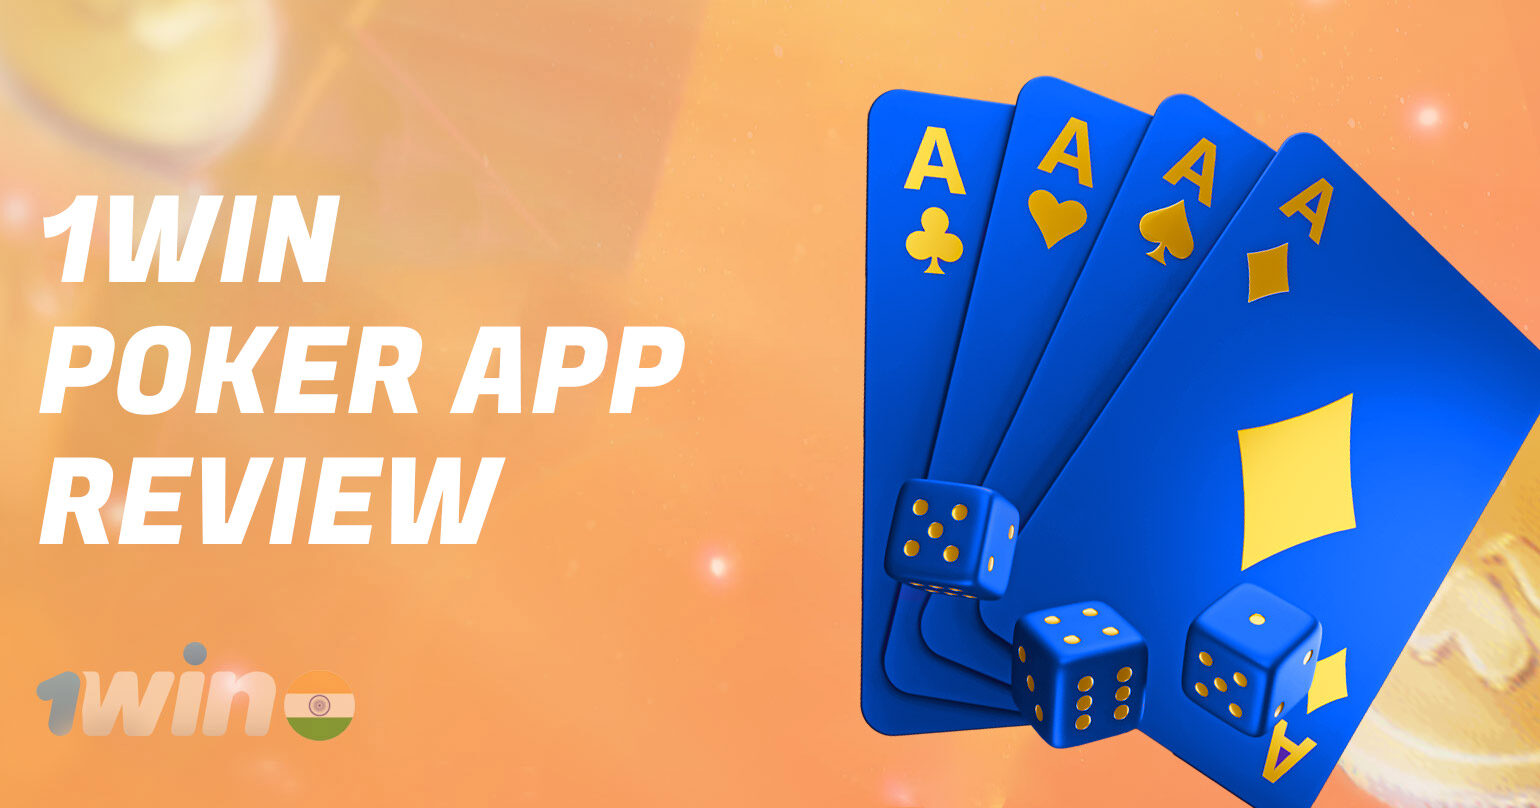 A detailed review of the 1win poker application.